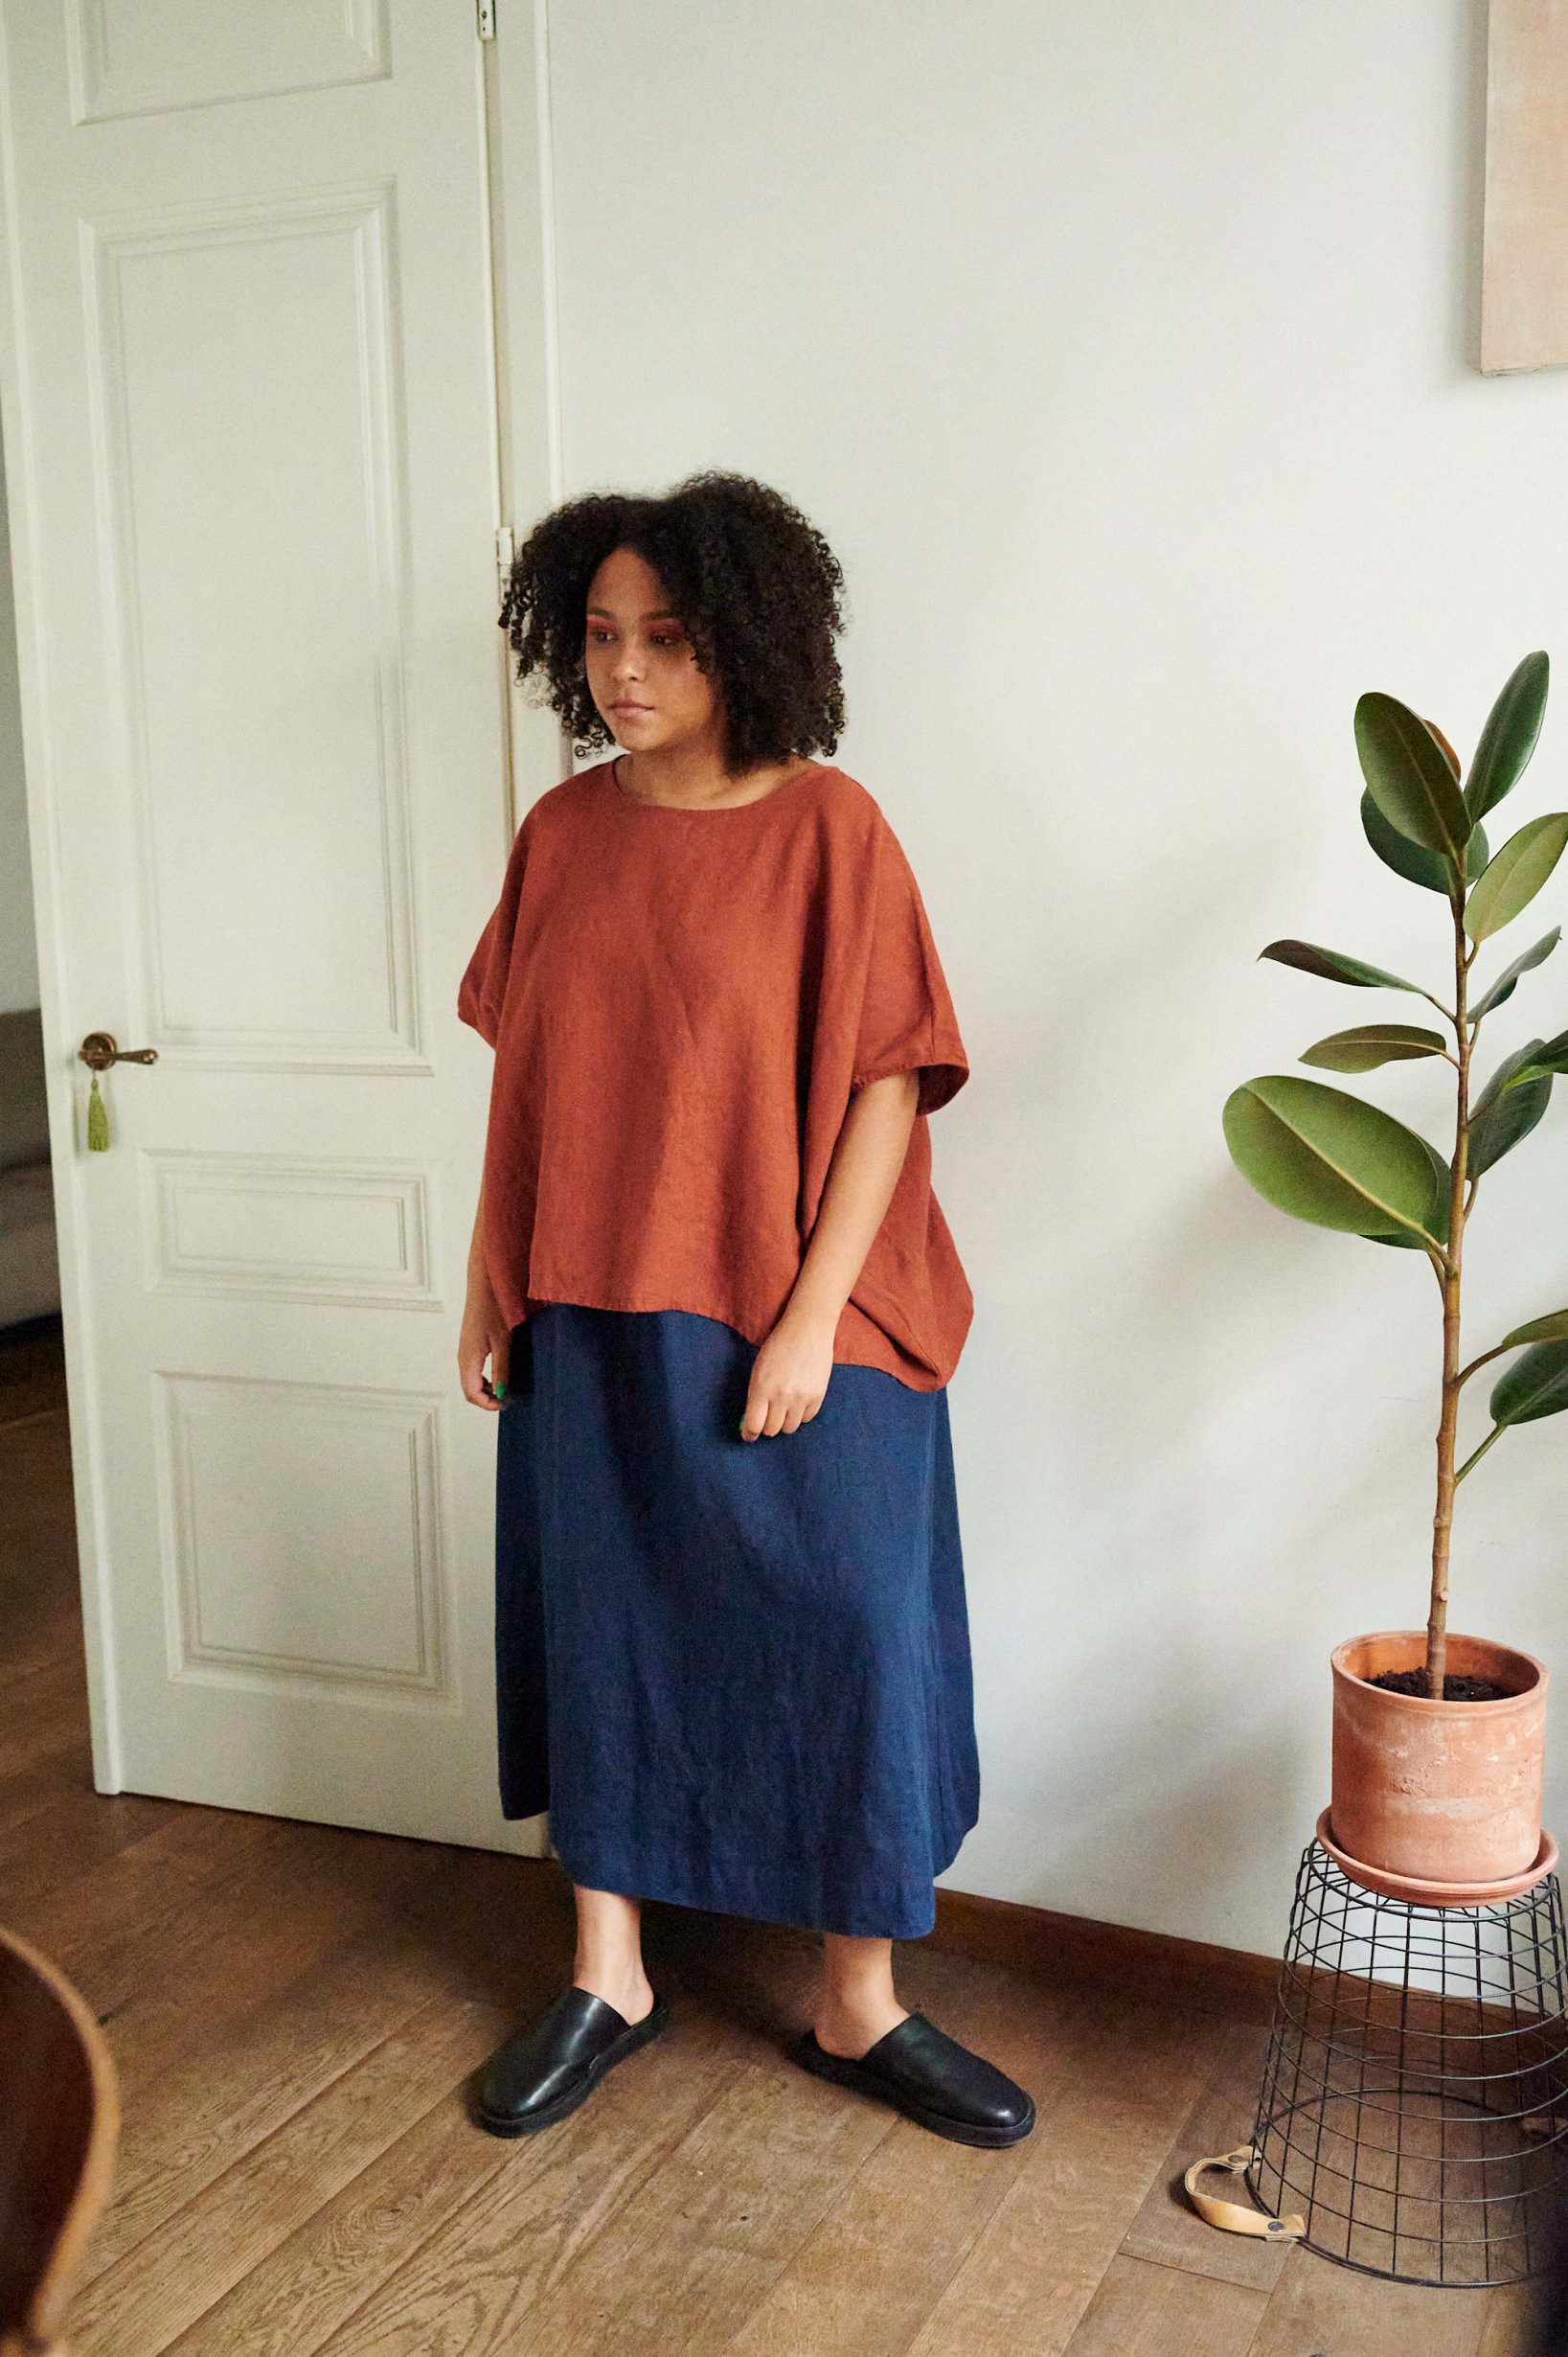 A one-size-fits-all linen top paired with a long flowy linen skirt